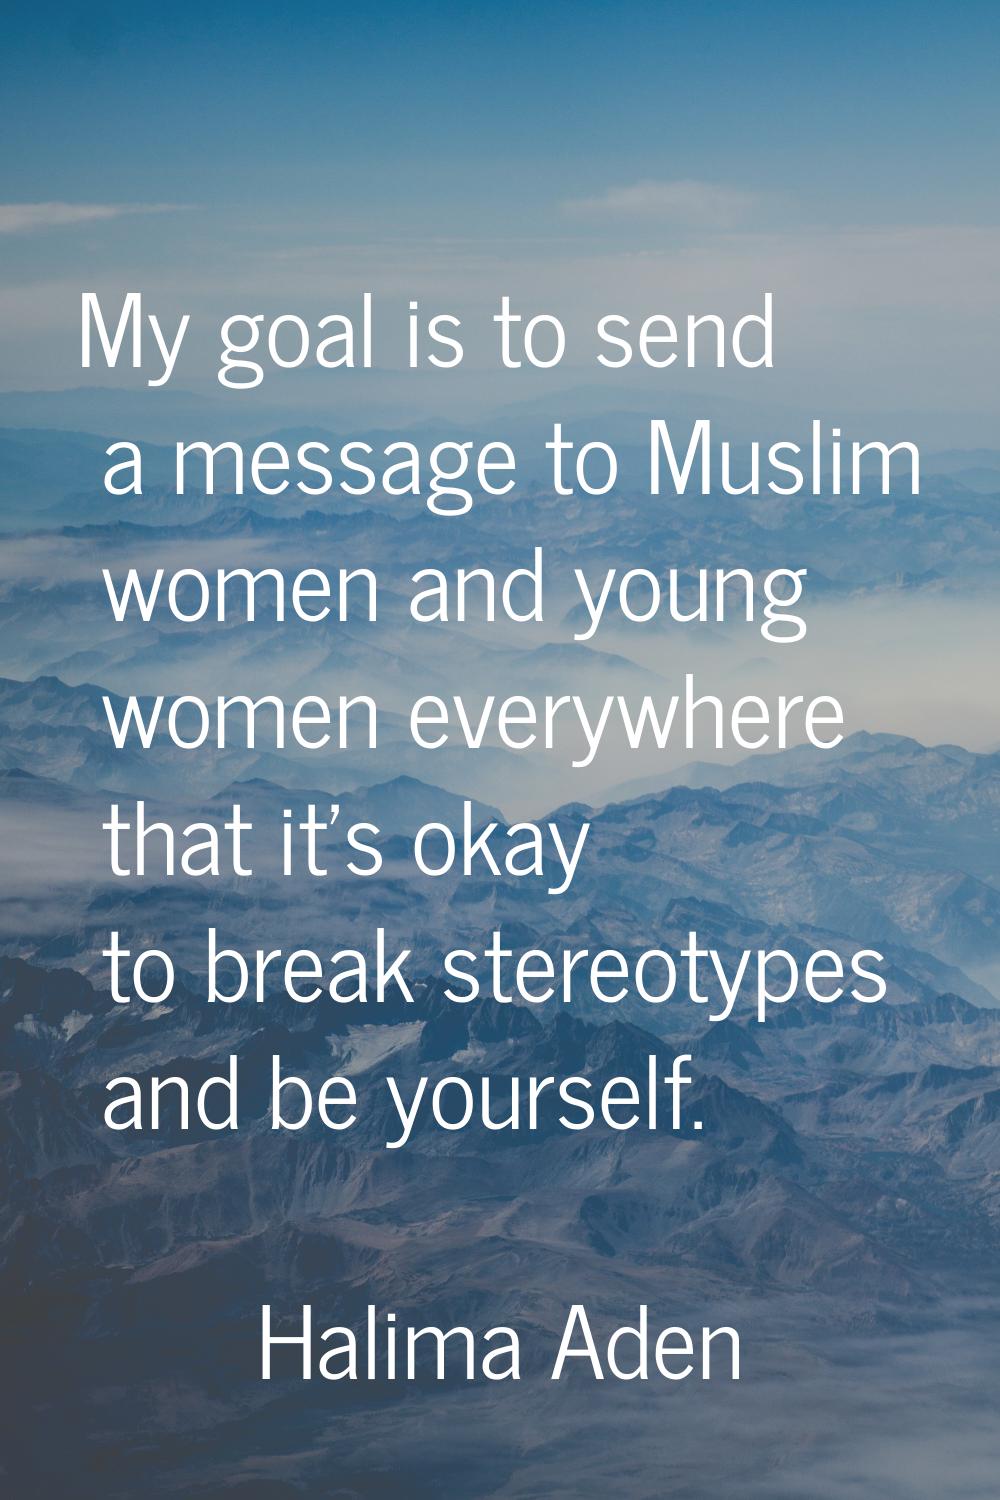 My goal is to send a message to Muslim women and young women everywhere that it's okay to break ste